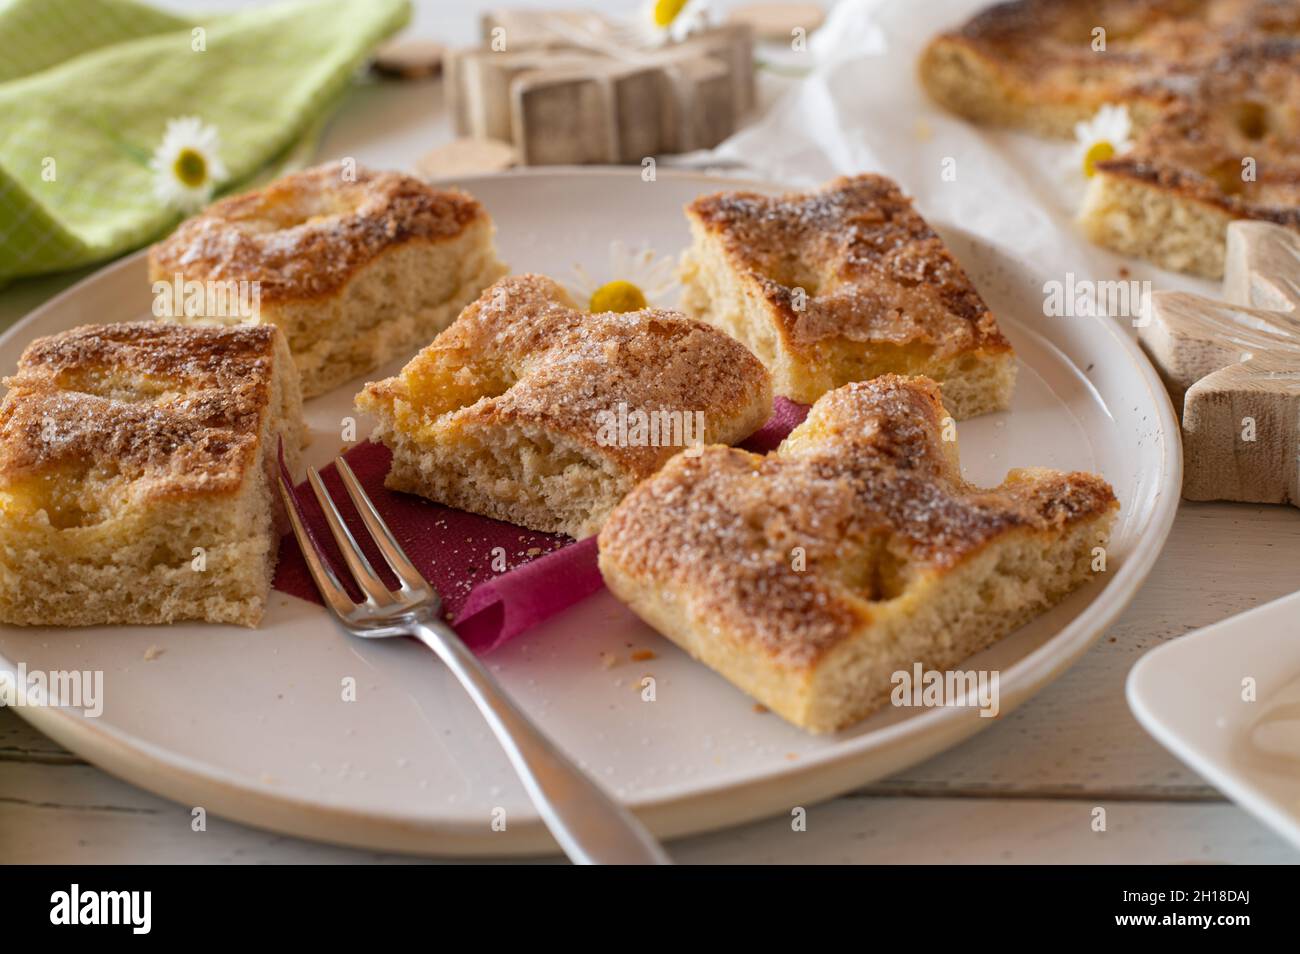 Butter cake with sugar topping. Delicious sheet cake or yeast cake with butter and topped with sugar. served in pieces on a plate with fork Stock Photo